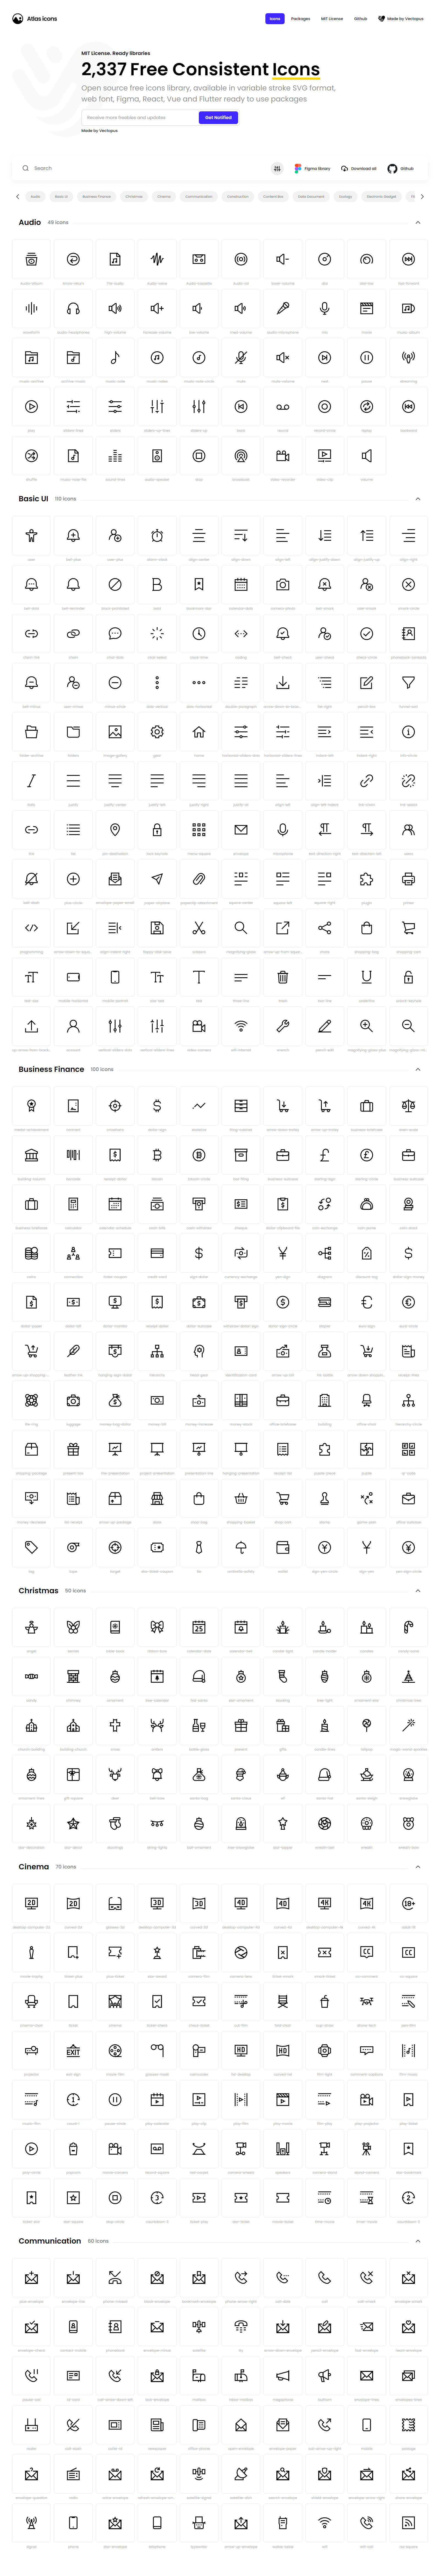 Atlas Icons - Free, Open-Source Pixel Perfect Icons